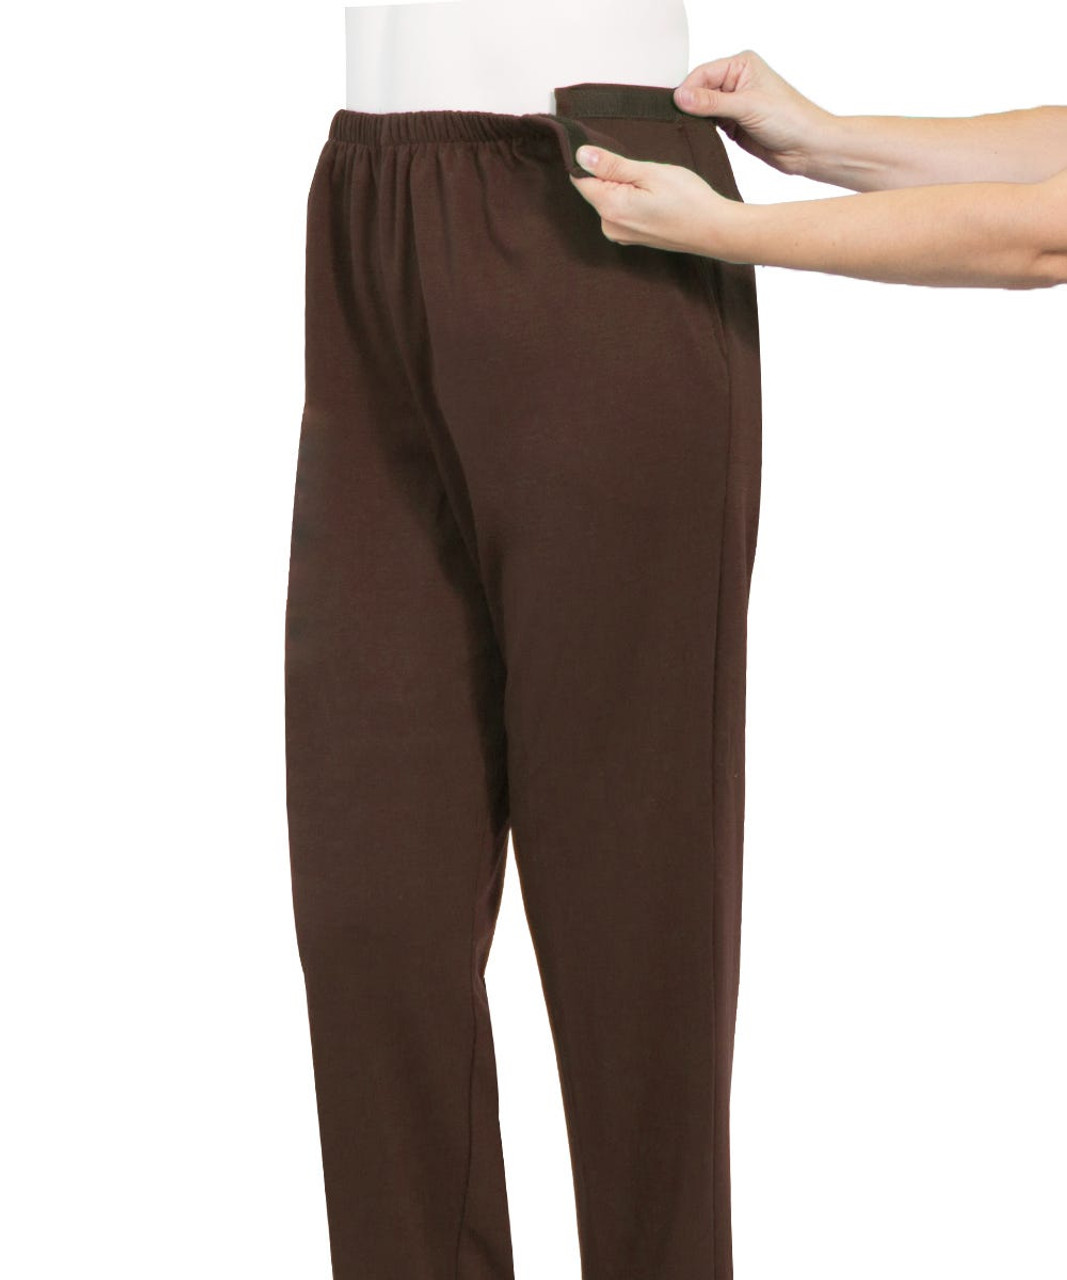 Silverts SV50660 Men's Easy Access Pants with Elastic Waist Brown, Size=XL, SV50660-SV57-XL